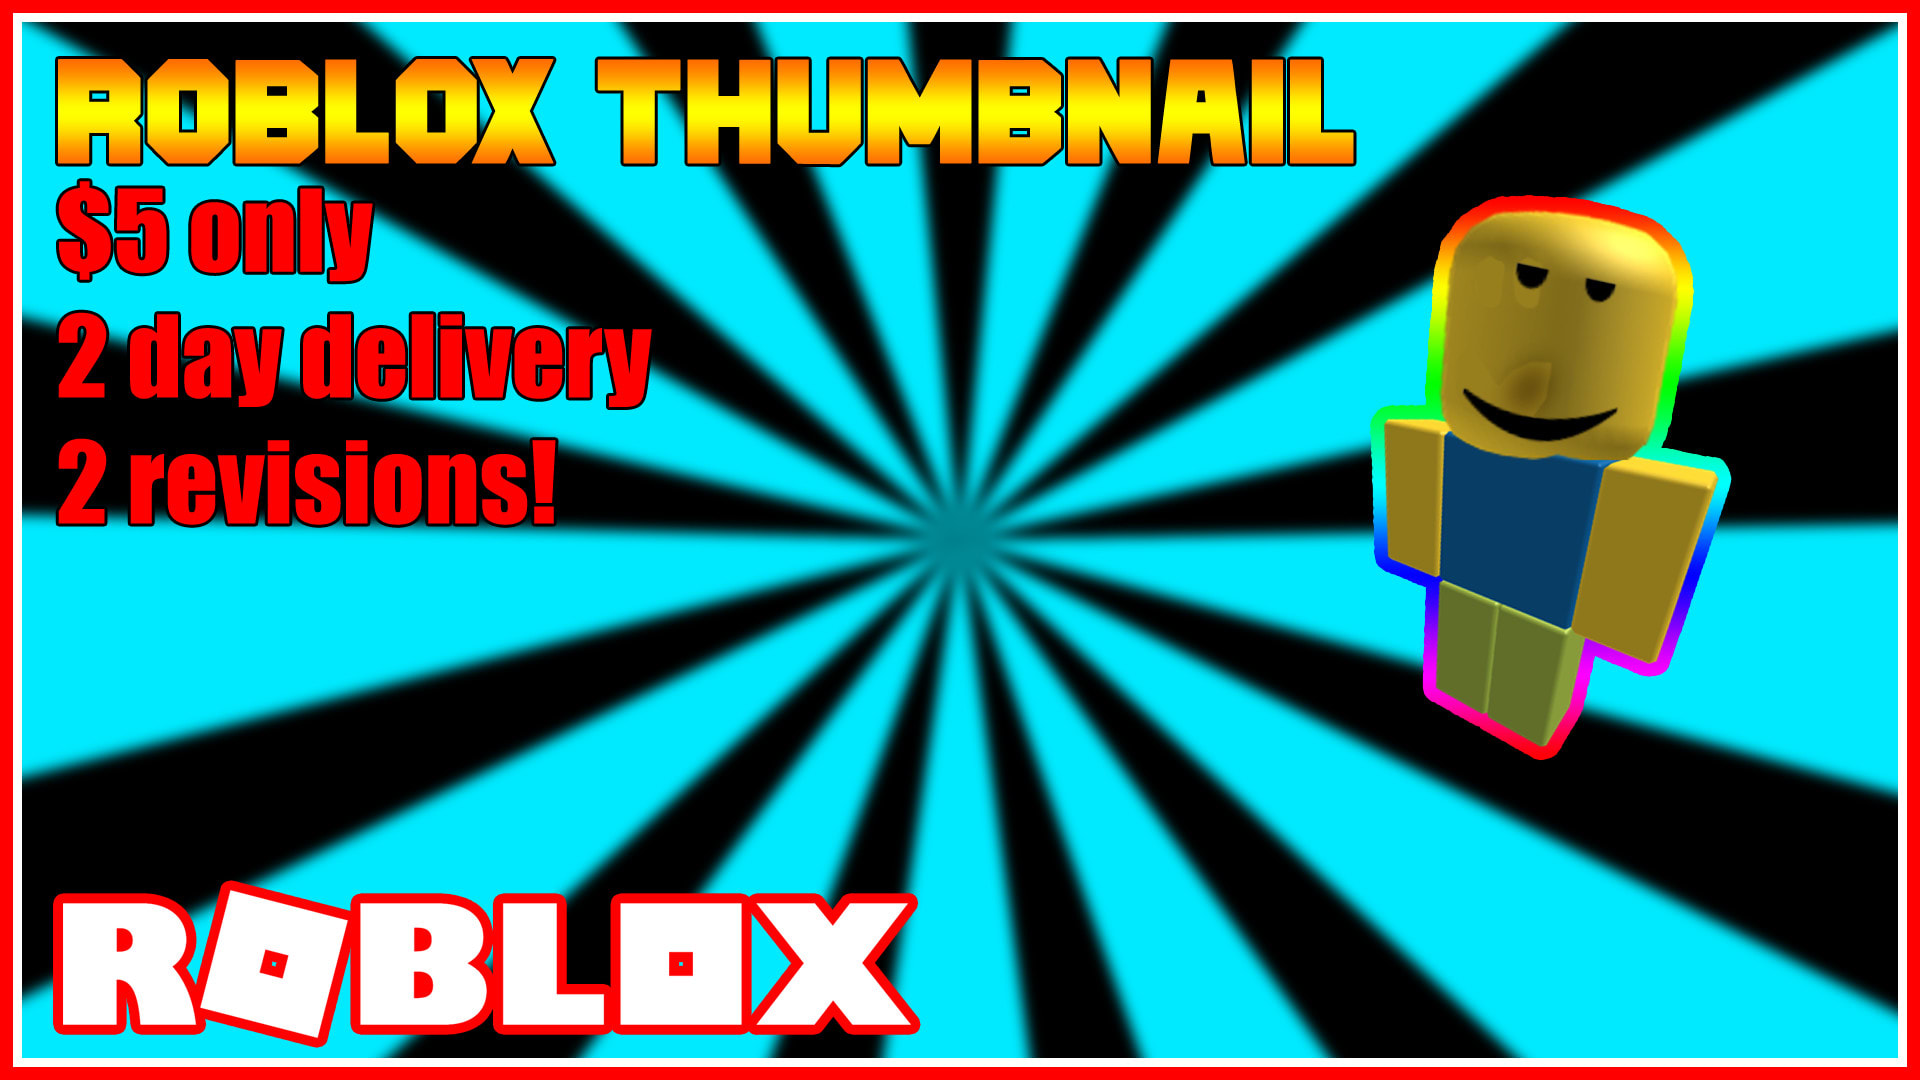 Make A Youtube Thumbnail For Roblox By Intervention 1 - roblox youtube thumbnail